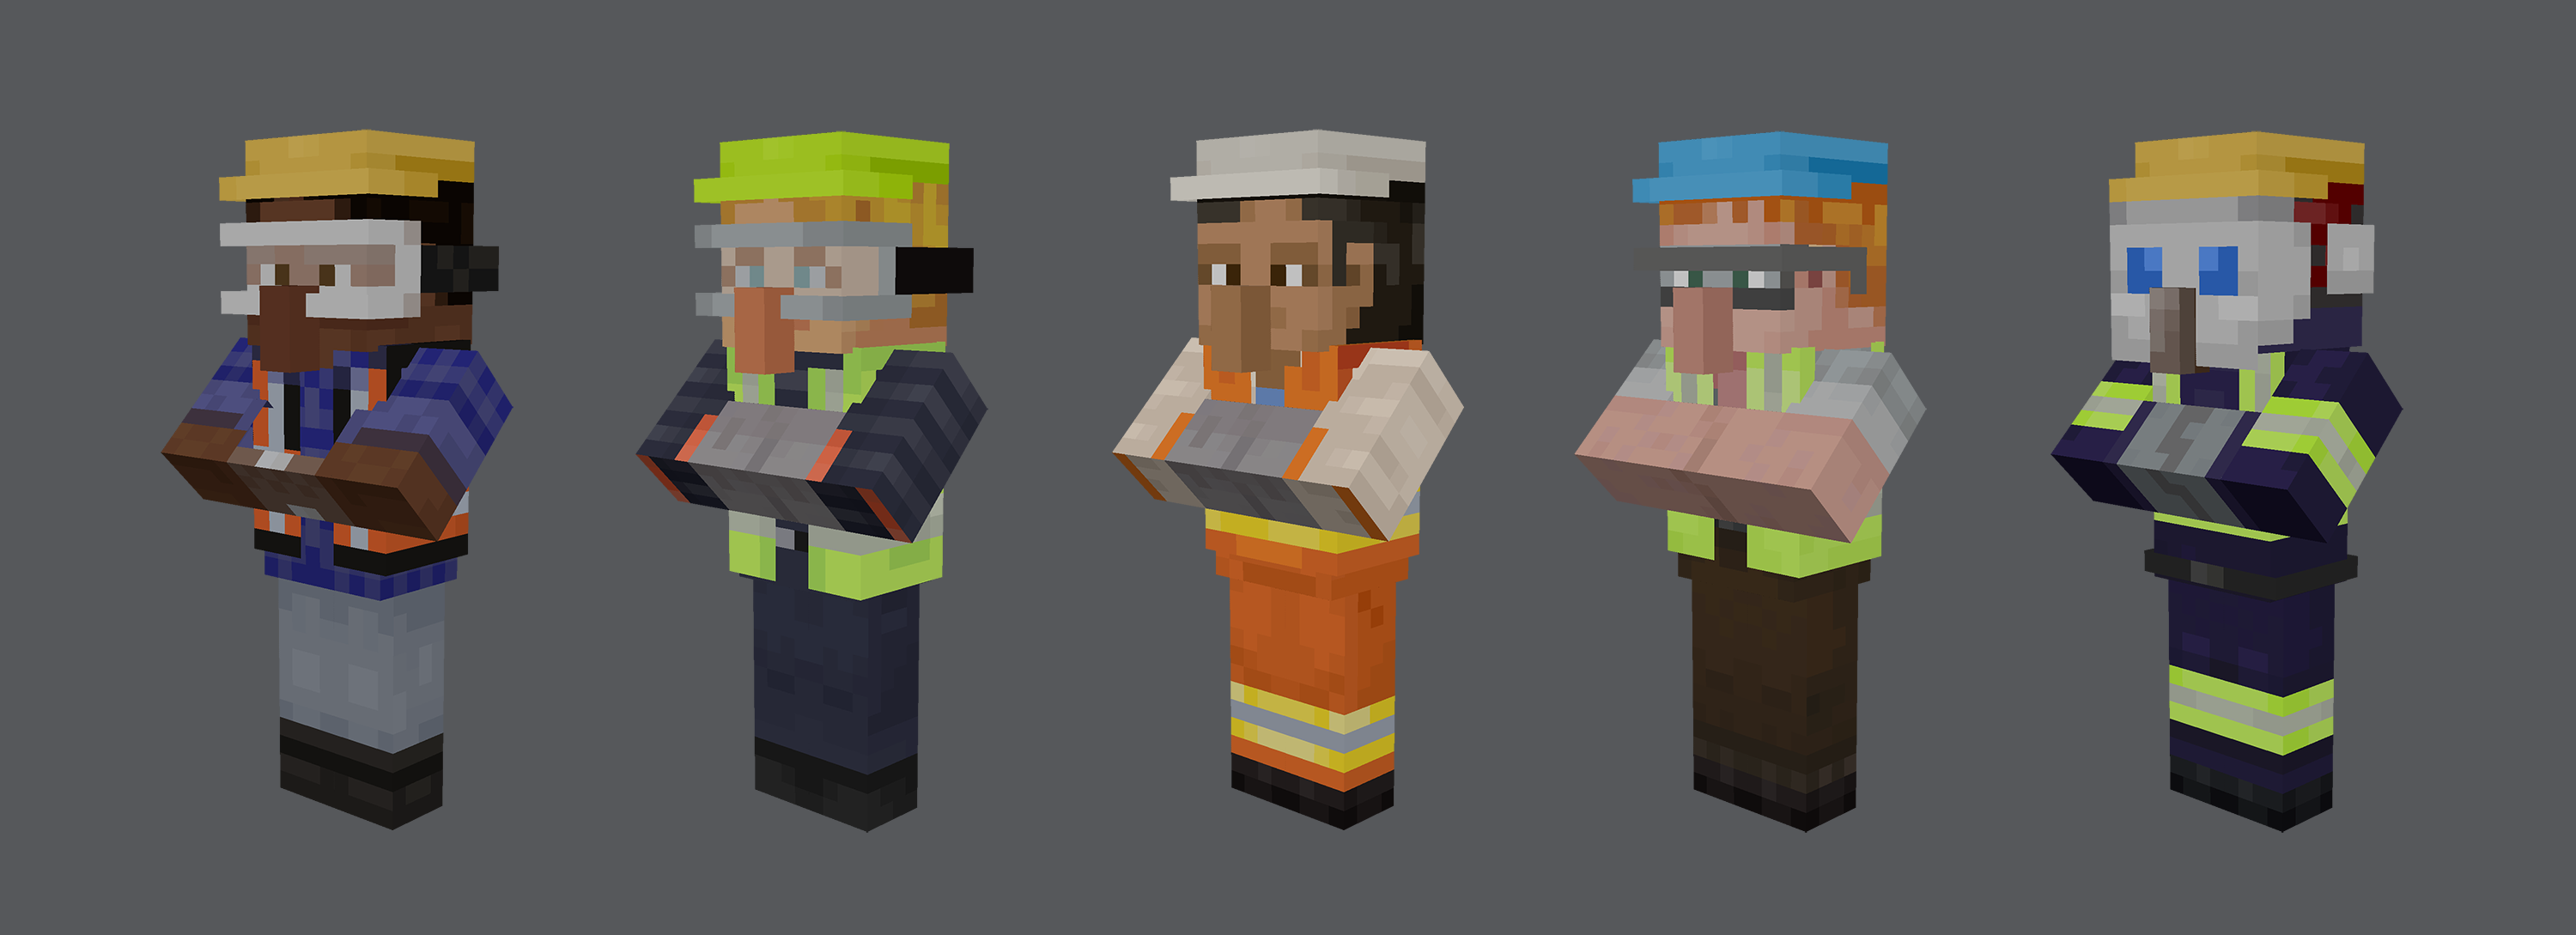 Example_Construction_Worker_Skins.png